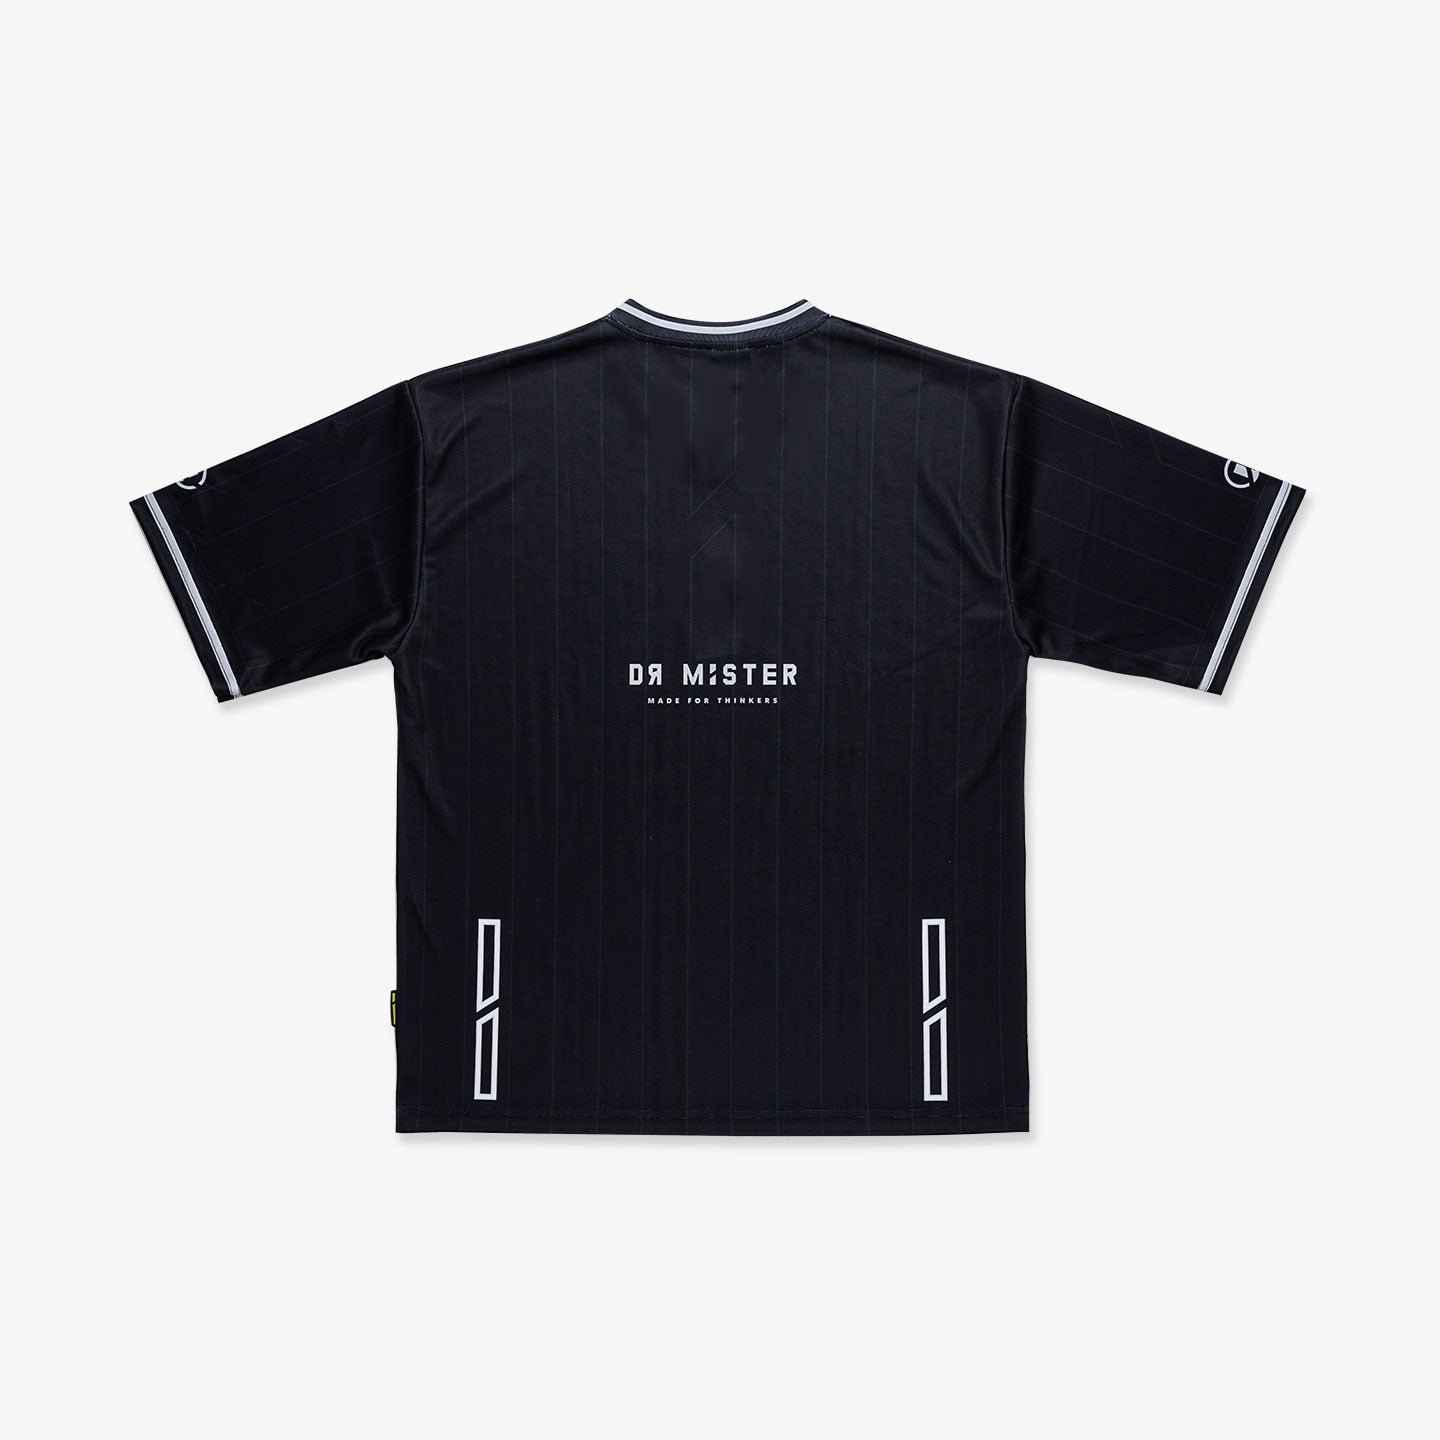 Ghosting Home Oversized Jersey - Black